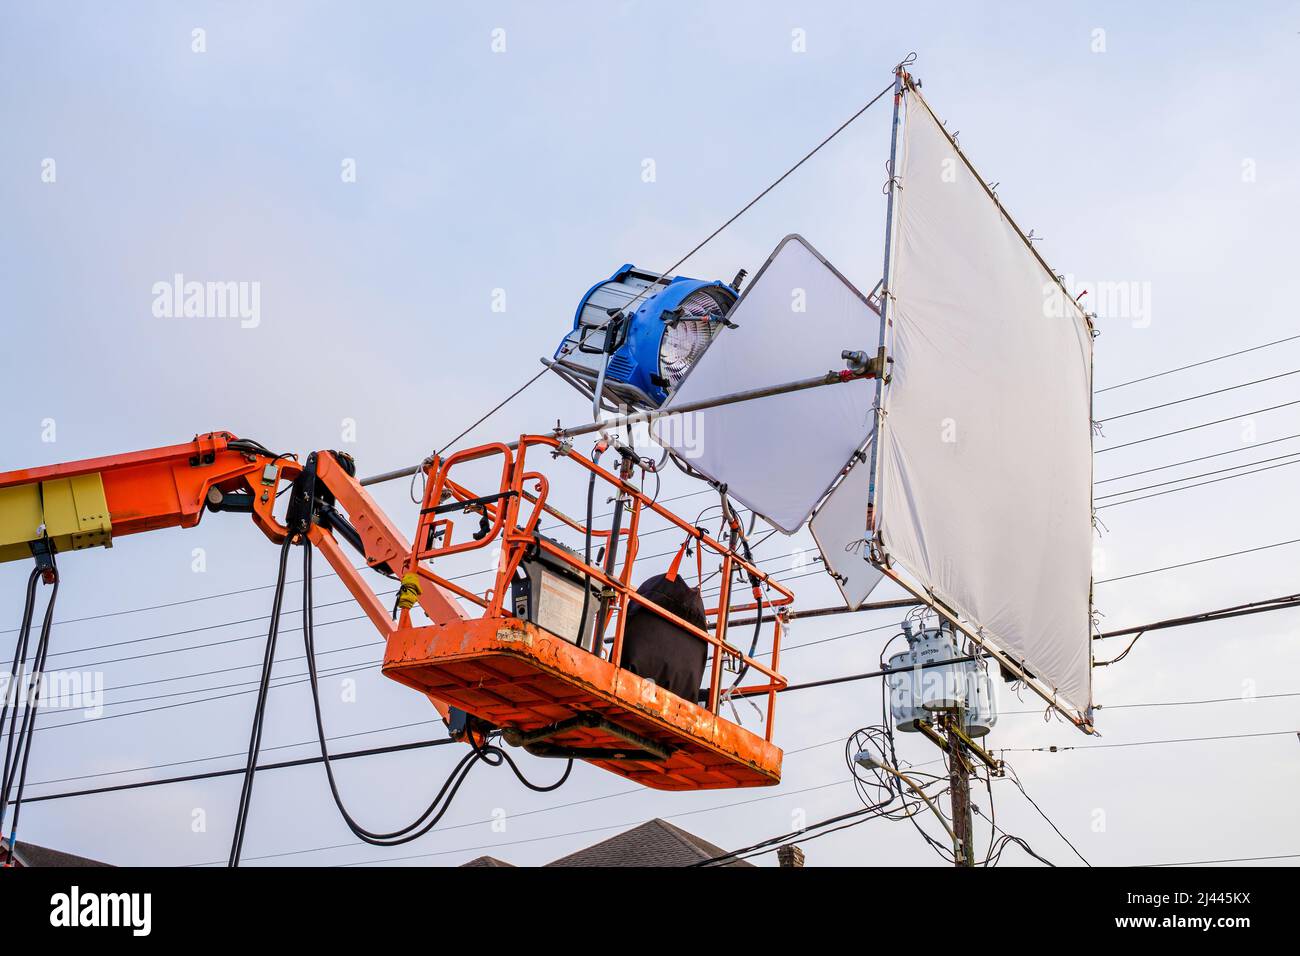 HMI lights with attached diffusers set up on a lift for an outdoor movie shoot in New Orleans, LA, USA Stock Photo